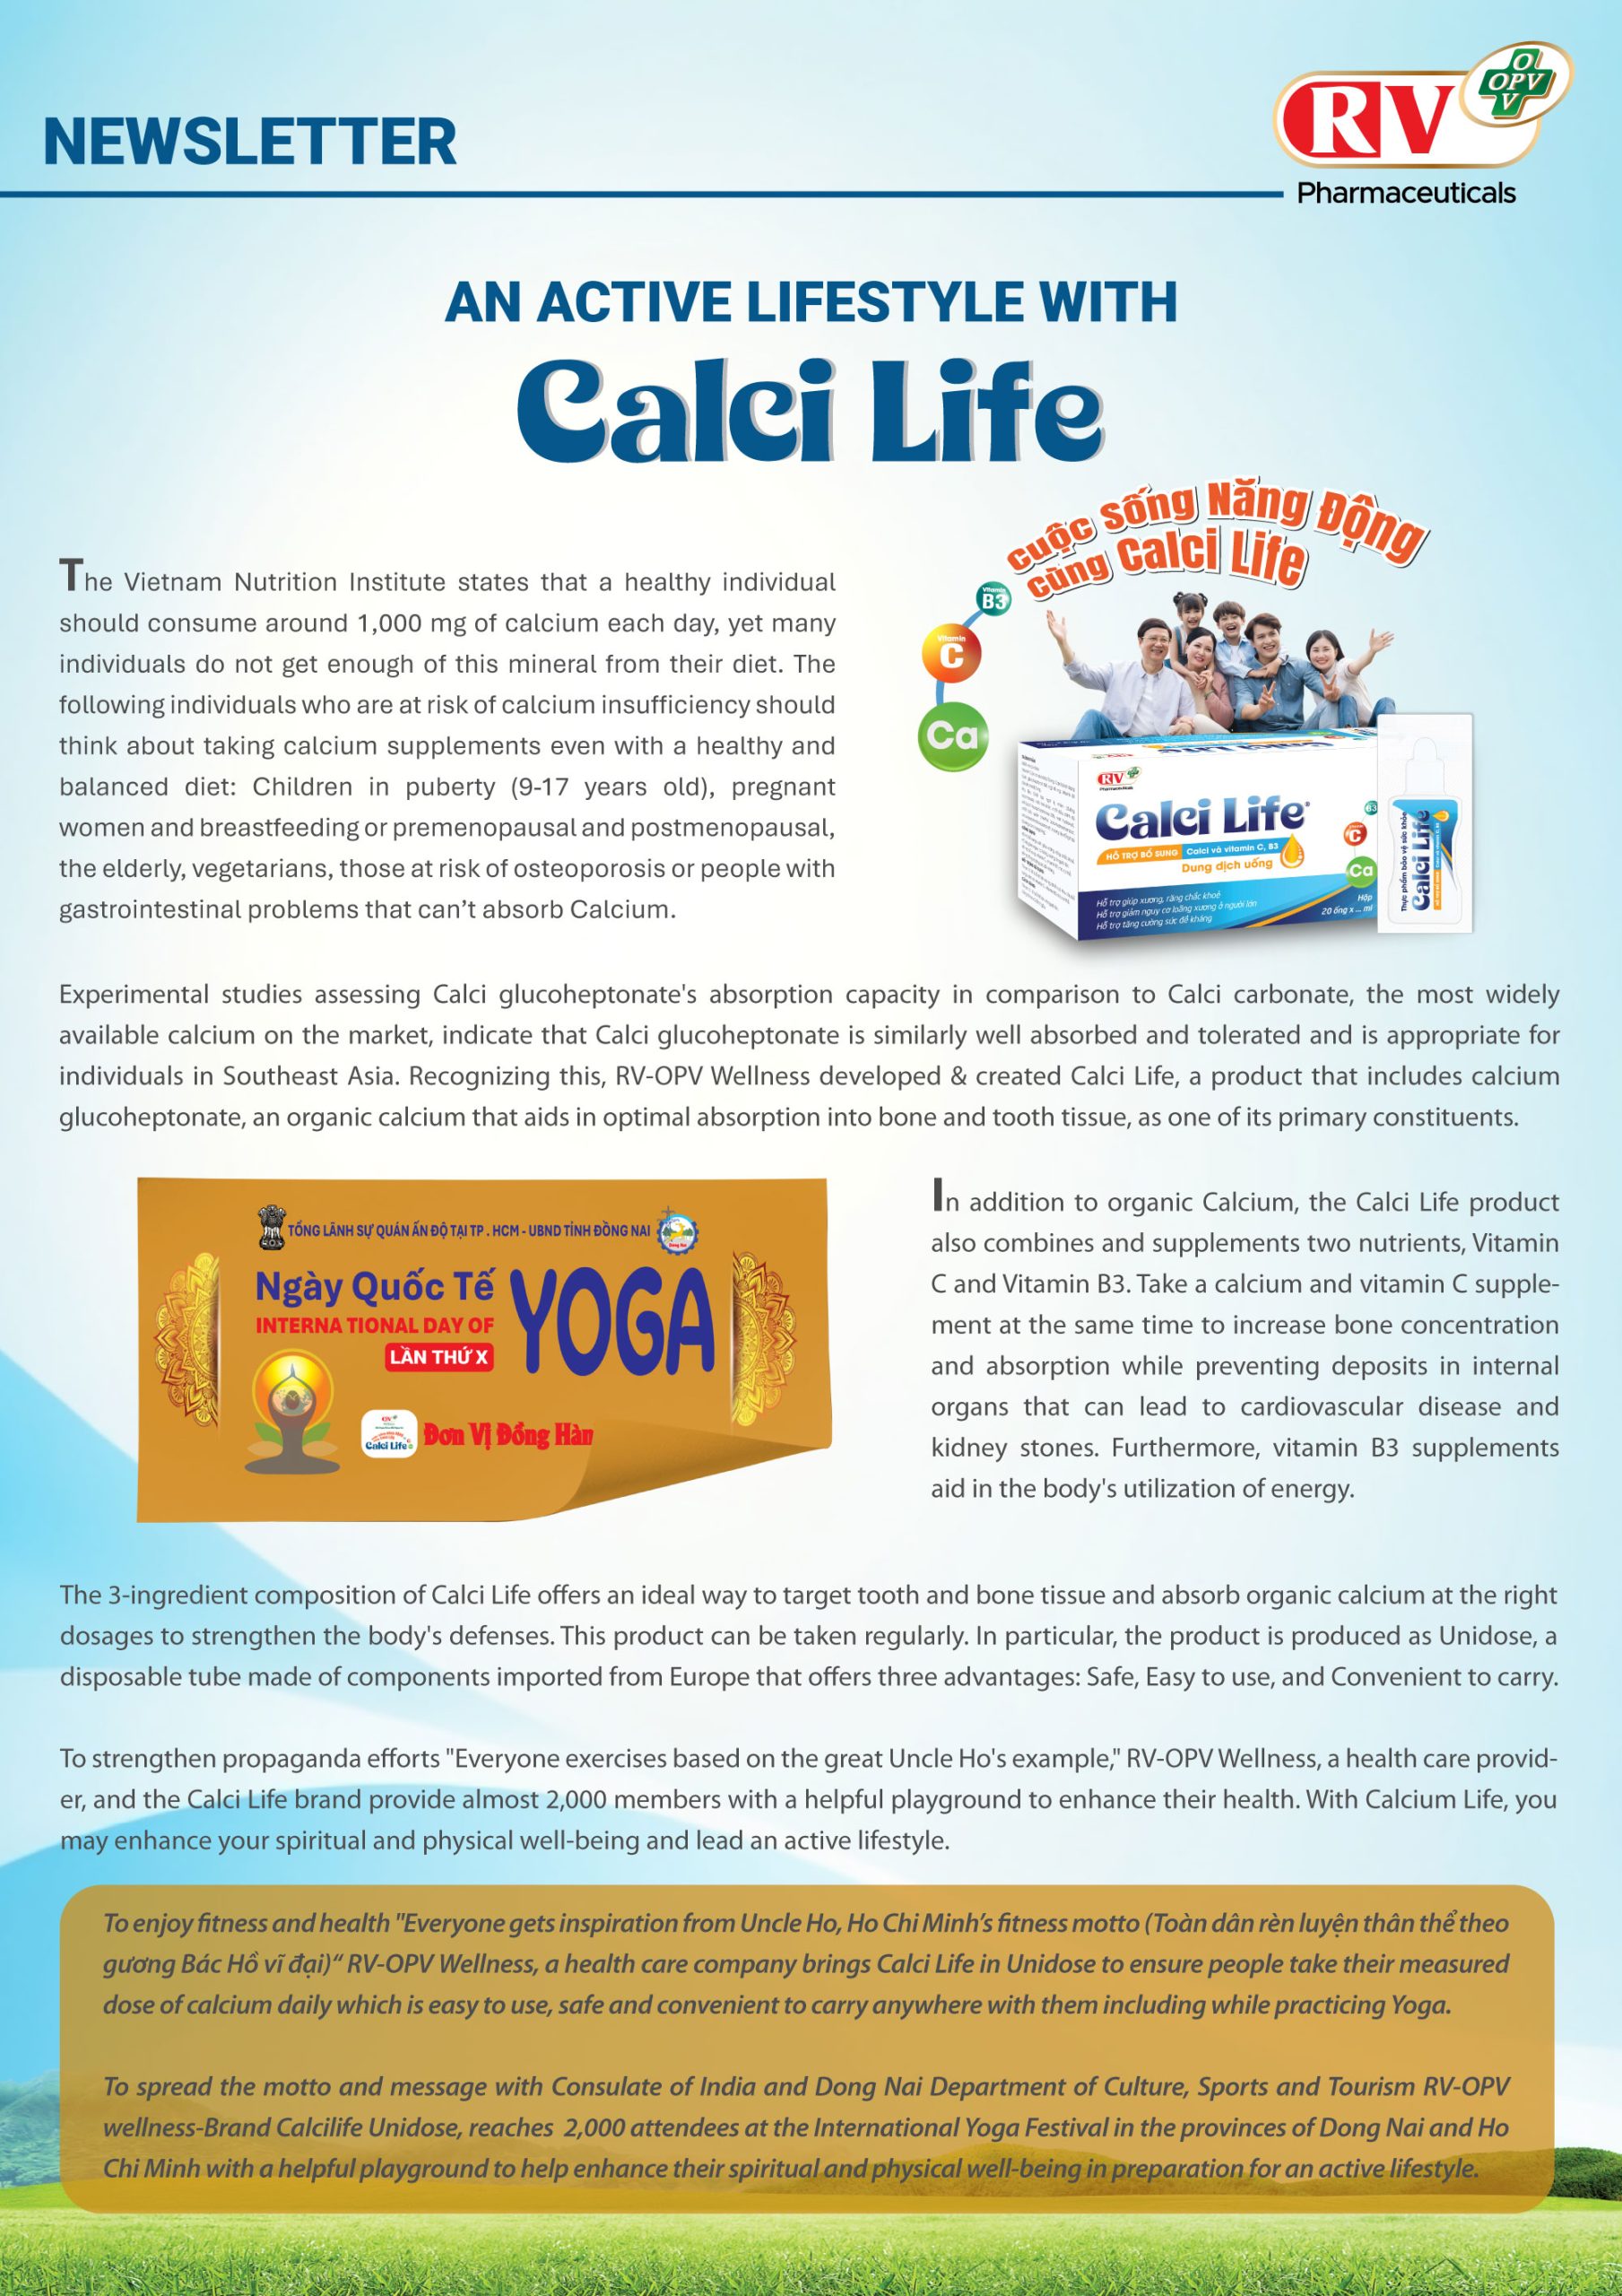 AN ACTIVE LIFESTYLE WITH CALCI LIFE